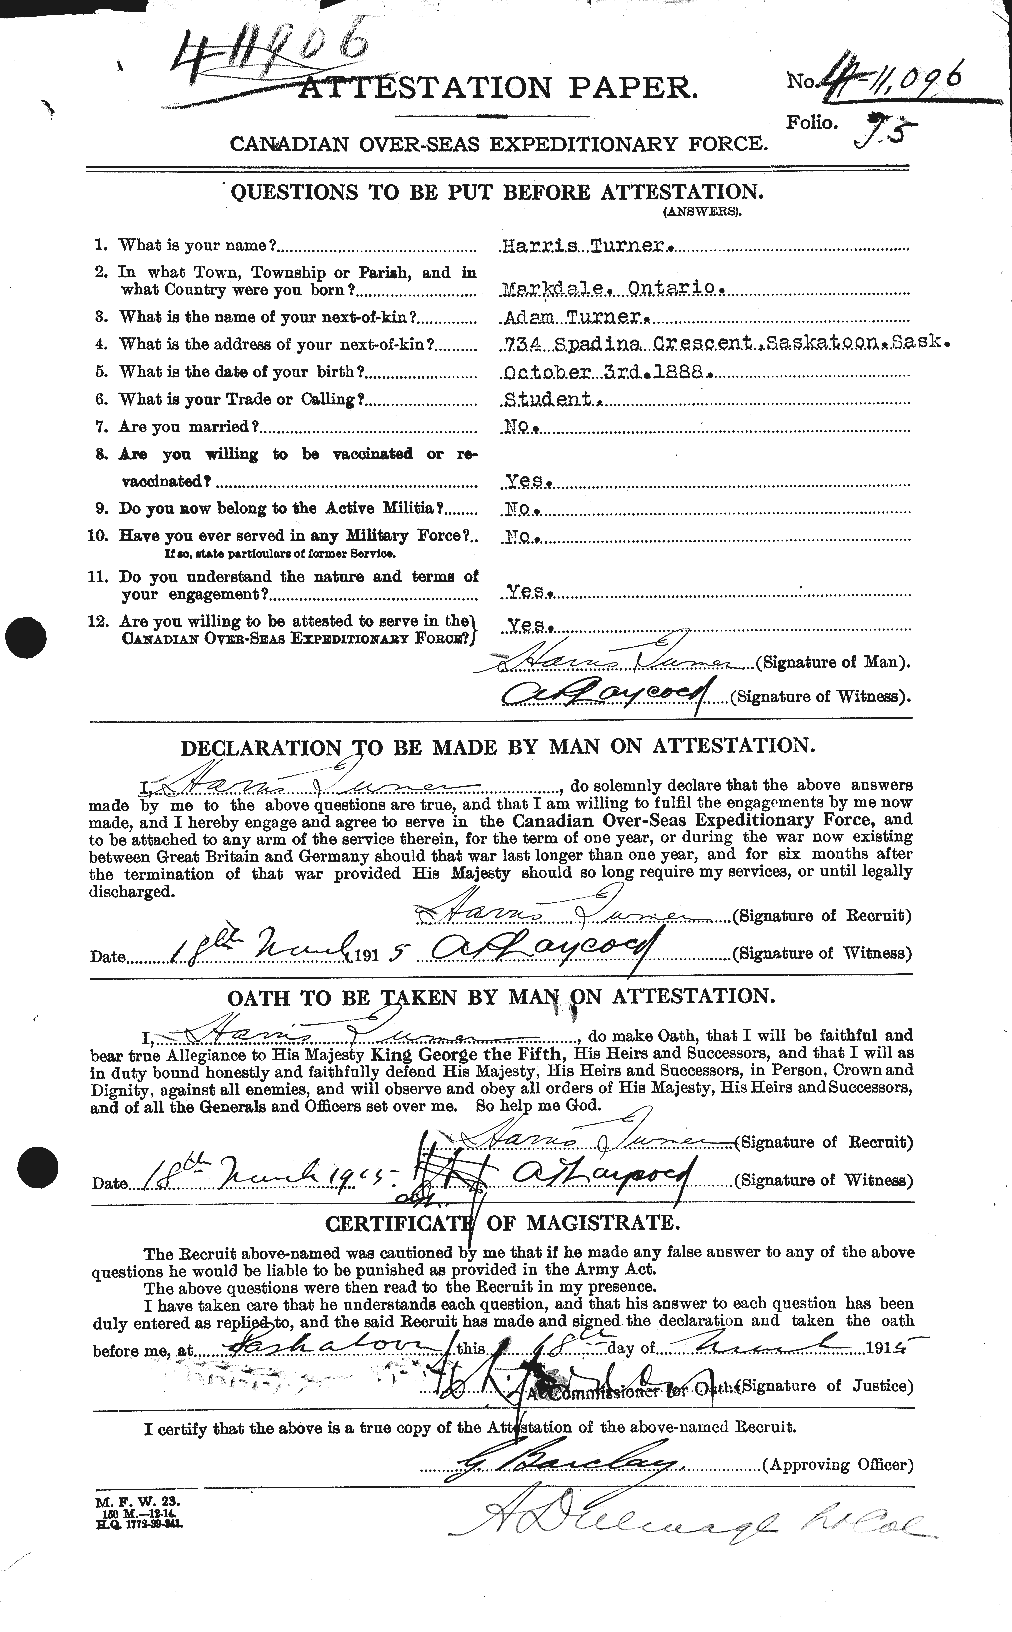 Personnel Records of the First World War - CEF 648572a